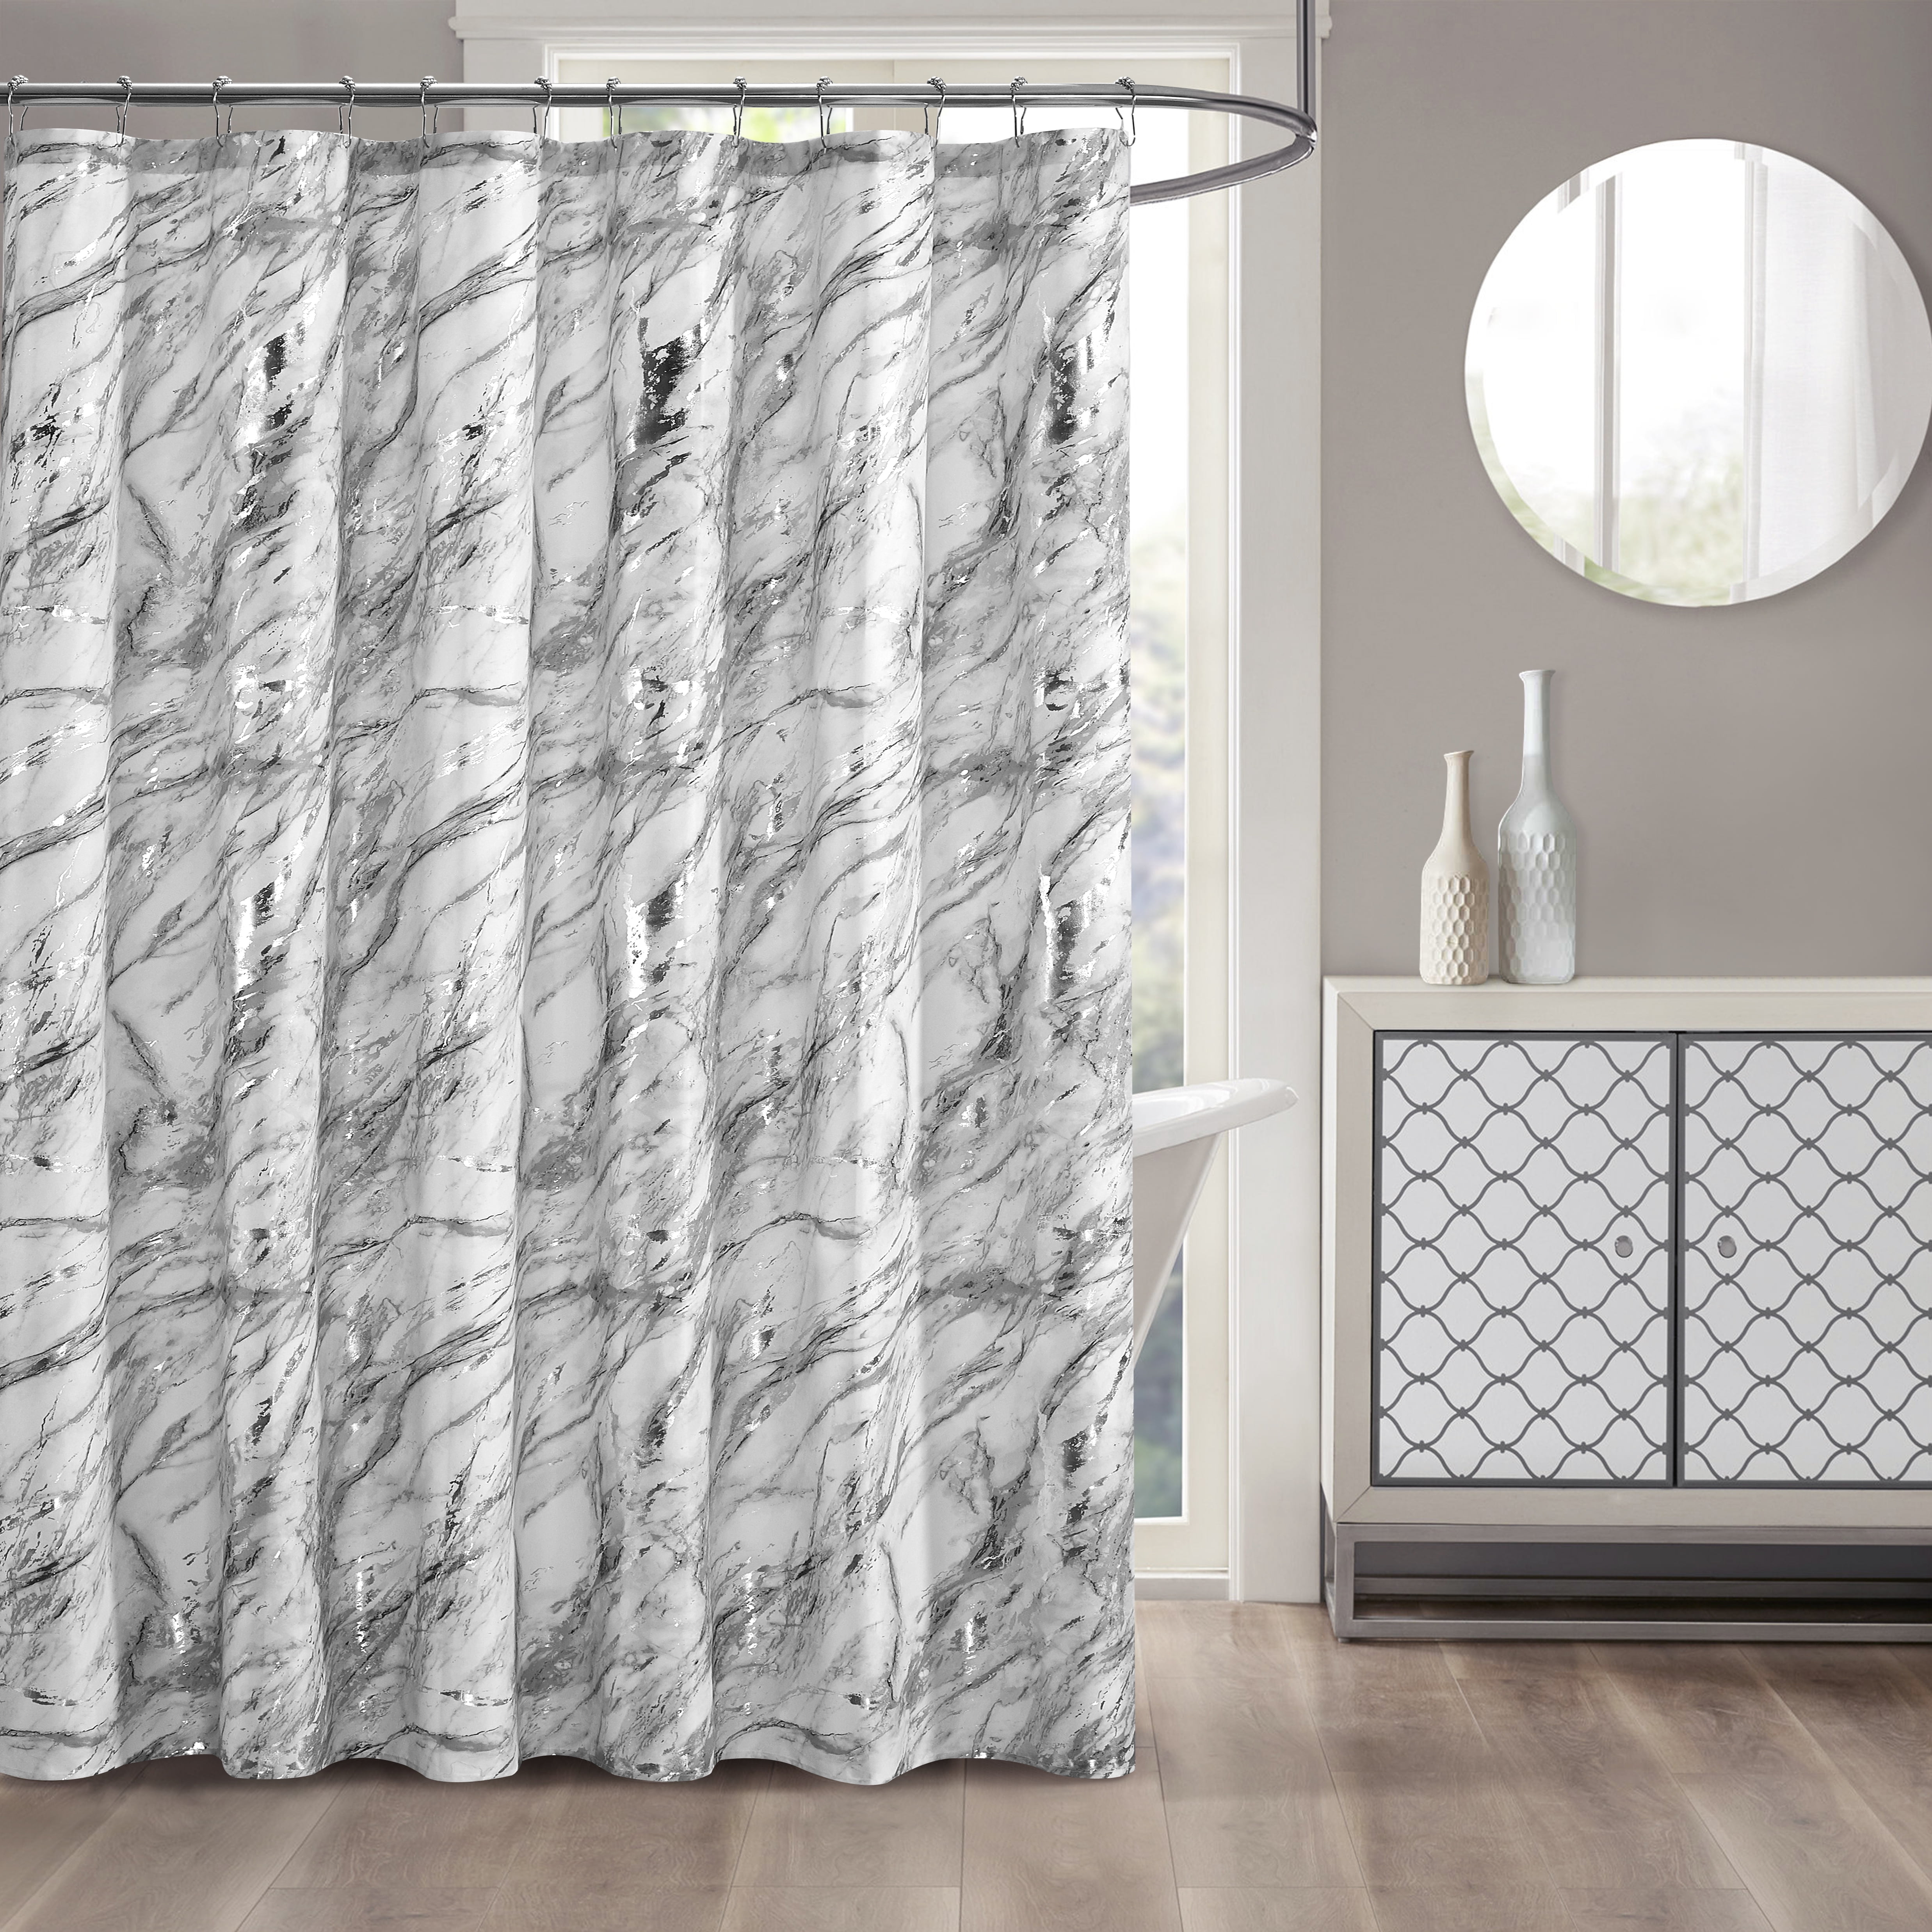 Fall Decor Shower Curtain Early Morning Woods Print for Bathroom 70 Inches Long 